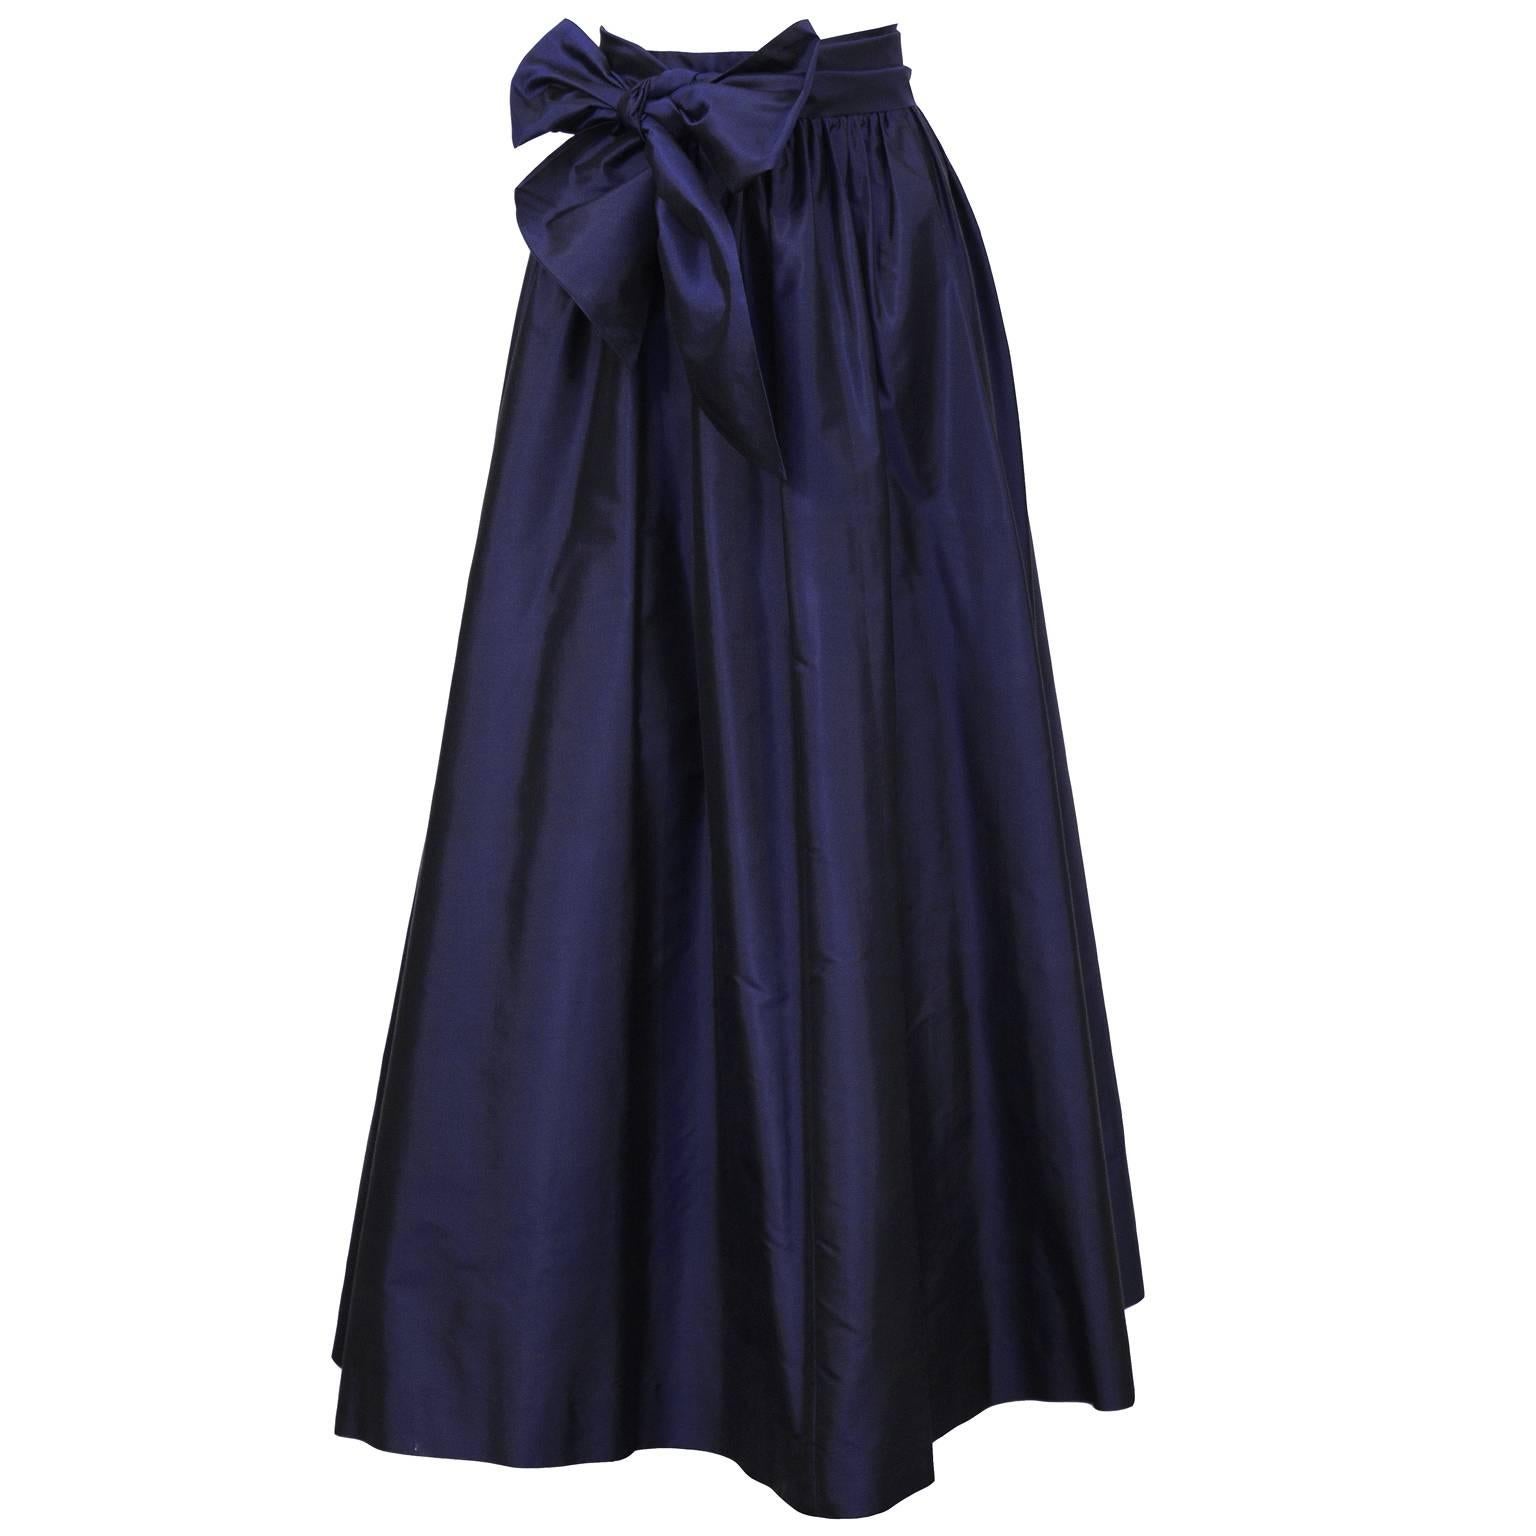 Beautiful Catherine Regehr navy silk taffeta ballgown skirt with matching sash from the 2000's. The skirt has a banded waist with some gathering. Falls to the floor and has a crinoline sewn into the lining. Zips up the back with a flat hook at the